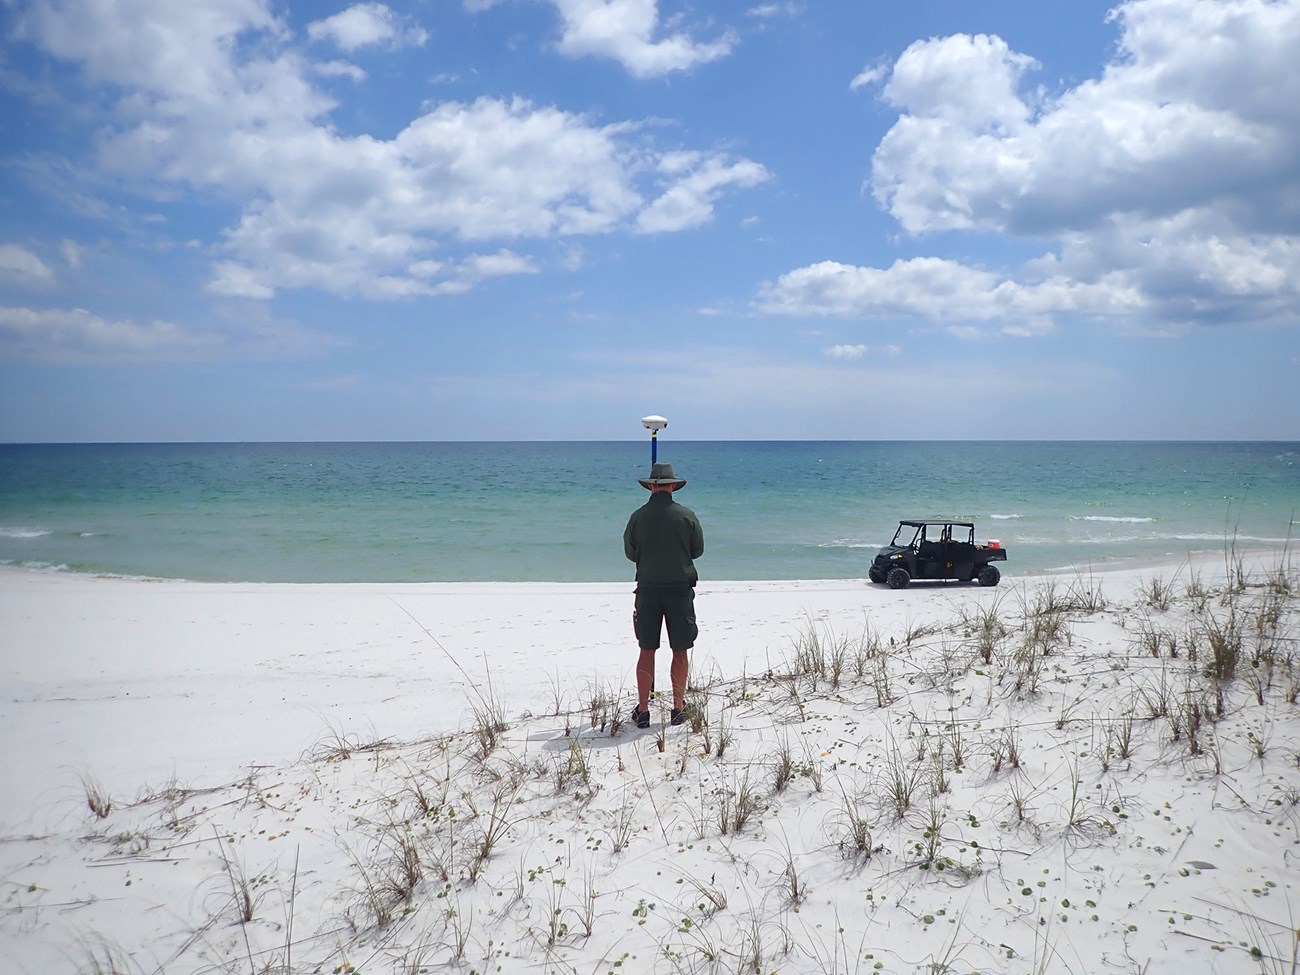 Man wearing an NPS uniform, stands with his back to the camera, holding a surveying instrument. The beach below him is white, with sparse beach grass. In front of him is an ATV with a turquoise ocean behind it.